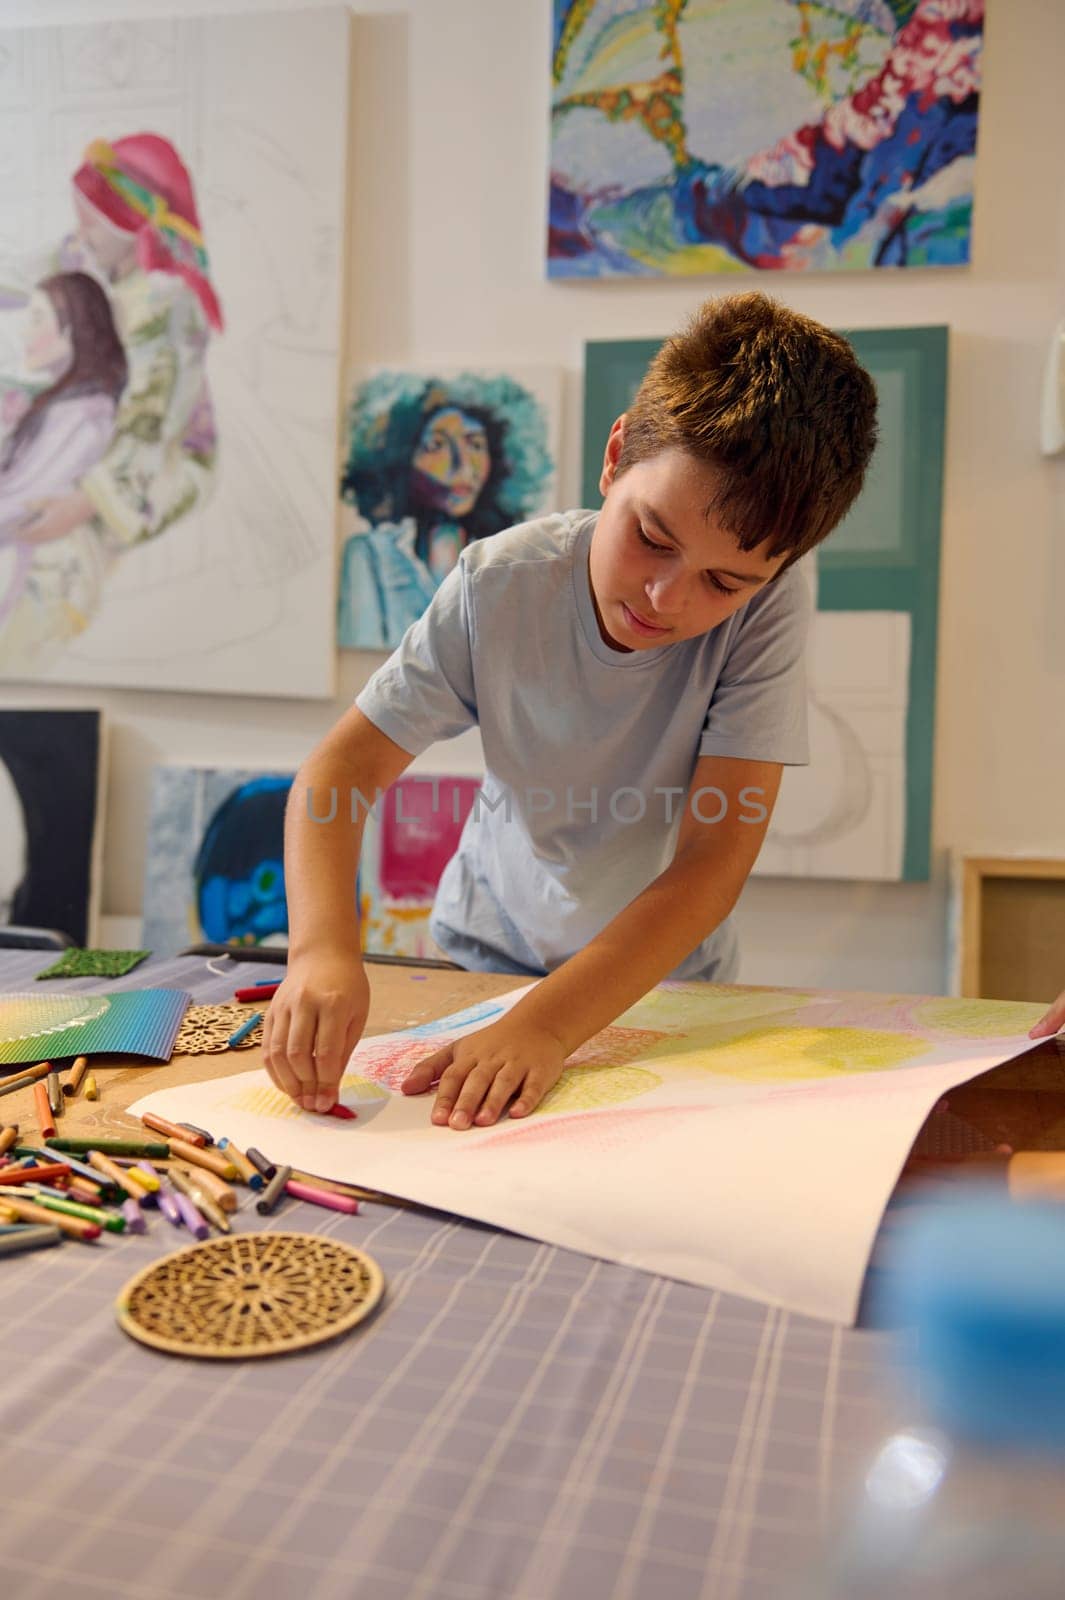 Teenage schoolboy drawing with pastel pencils on a white sheet by artgf